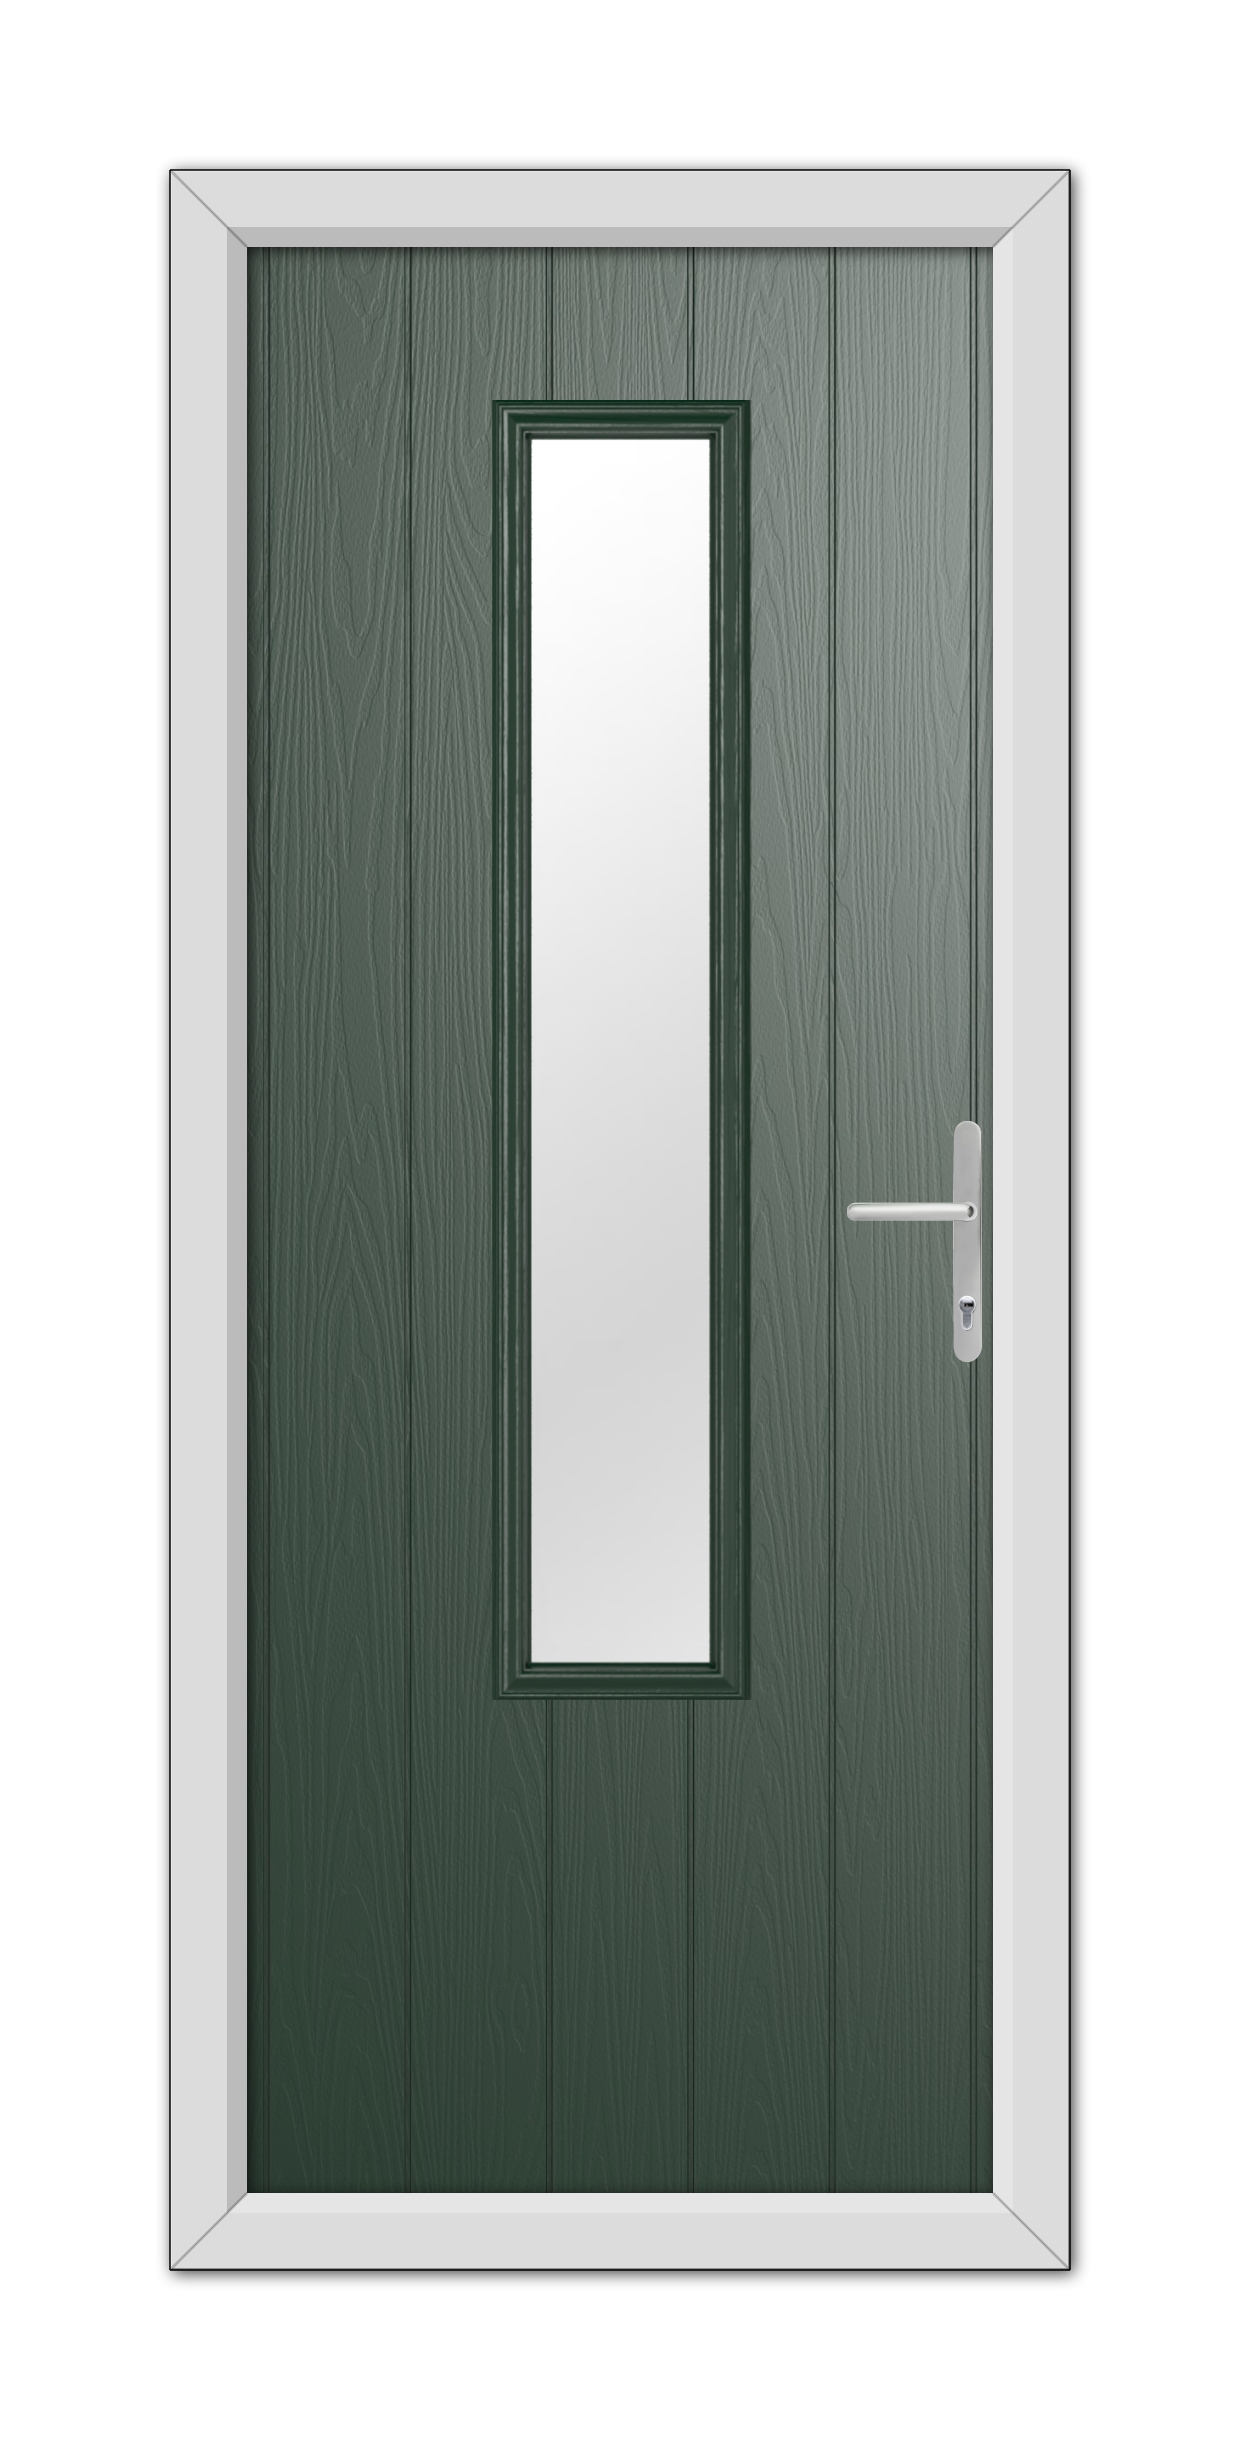 A Green Abercorn Composite Door 48mm Timber Core with a vertical rectangular glass panel and a metallic handle, set within a white frame.